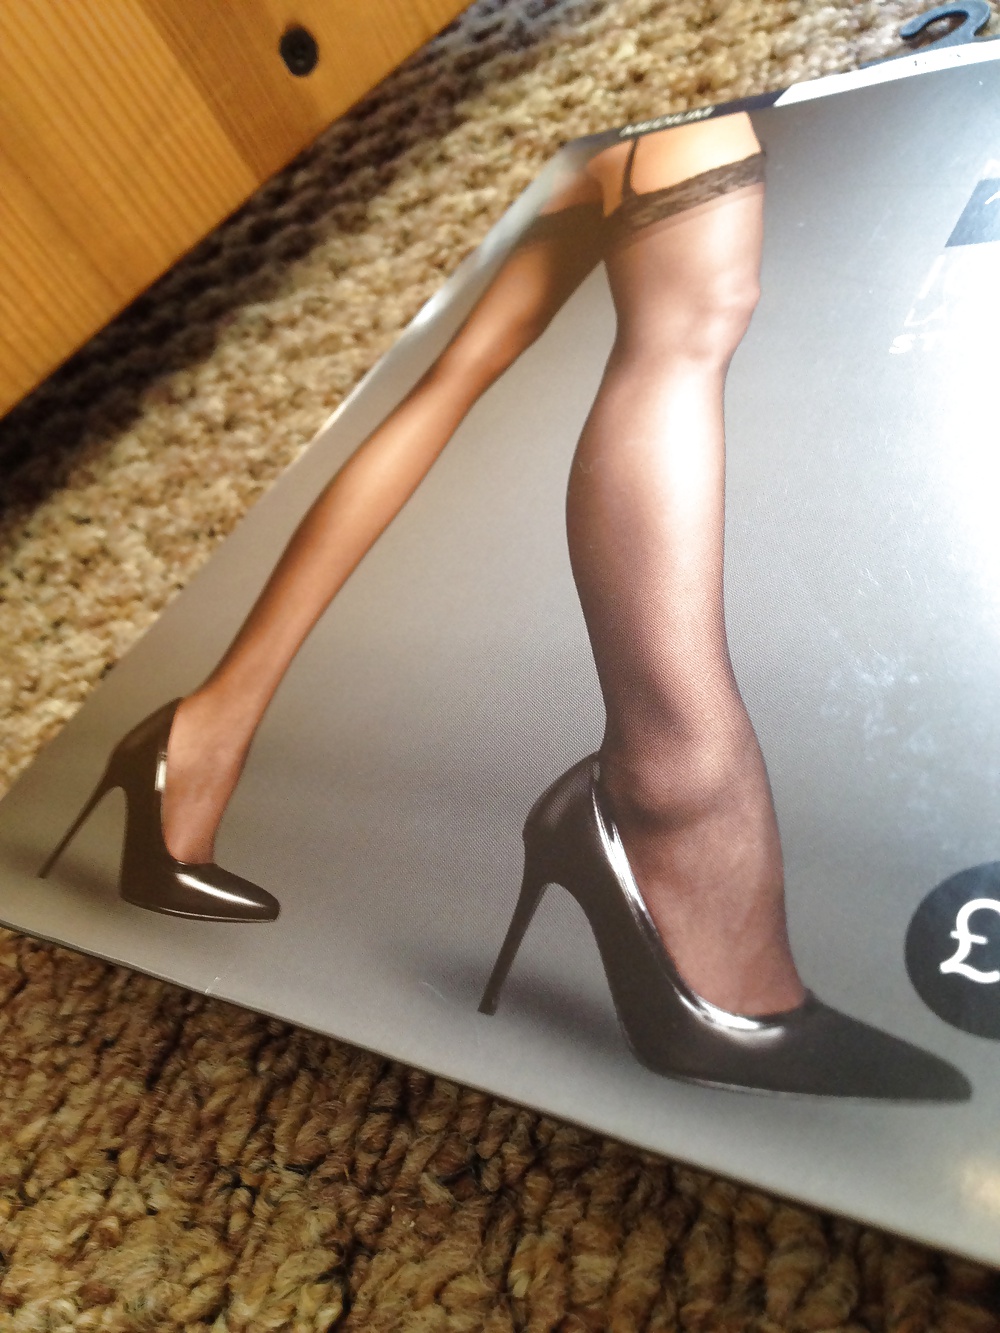 Stockings my mrs brought home  #32309926